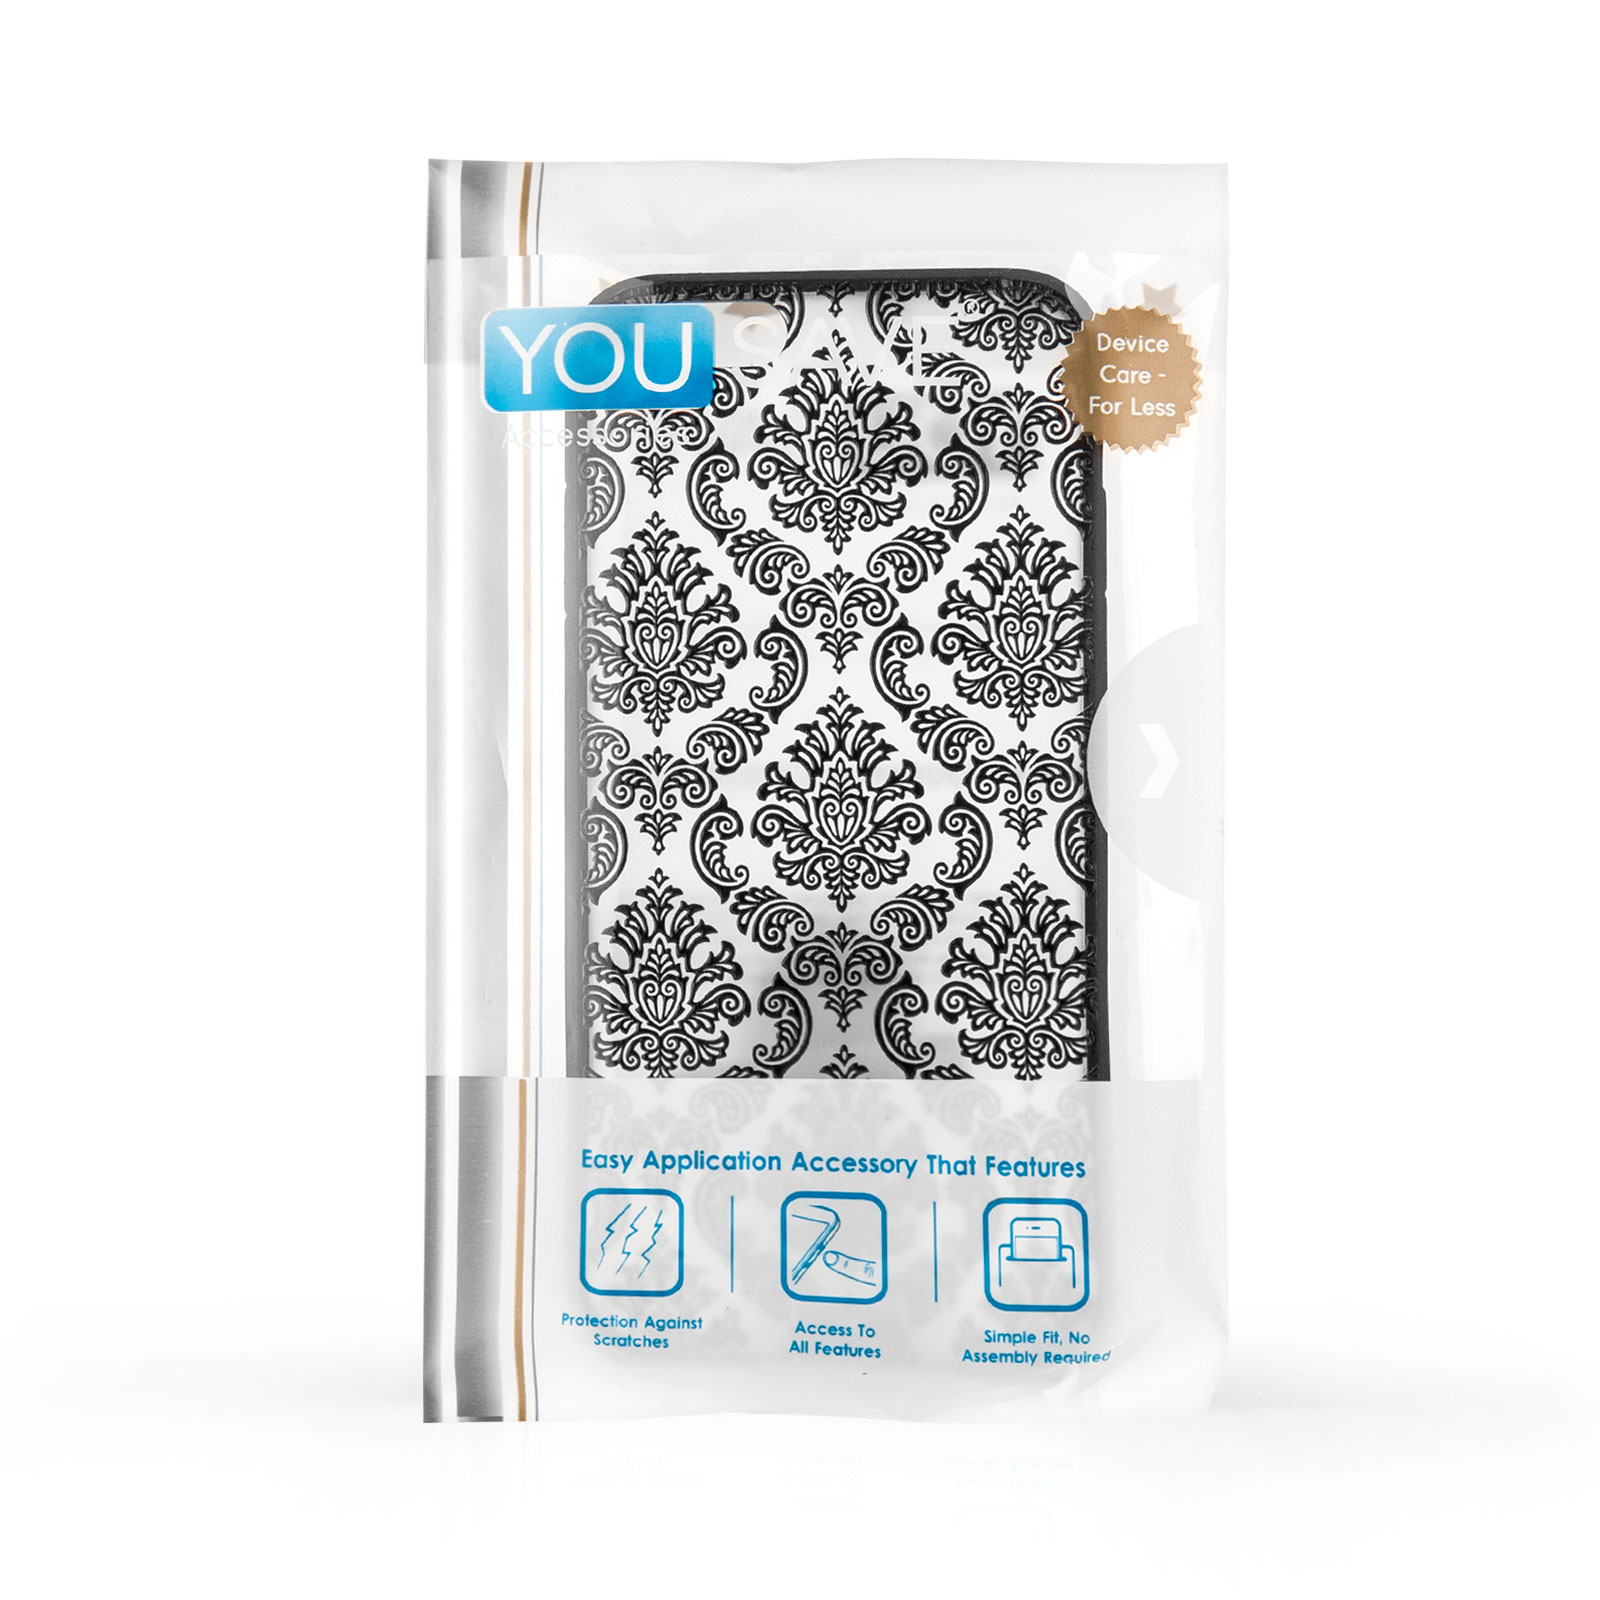 Yousave Accessories iPhone 6 and 6s TPU Patterned Hard Case - Damask Black